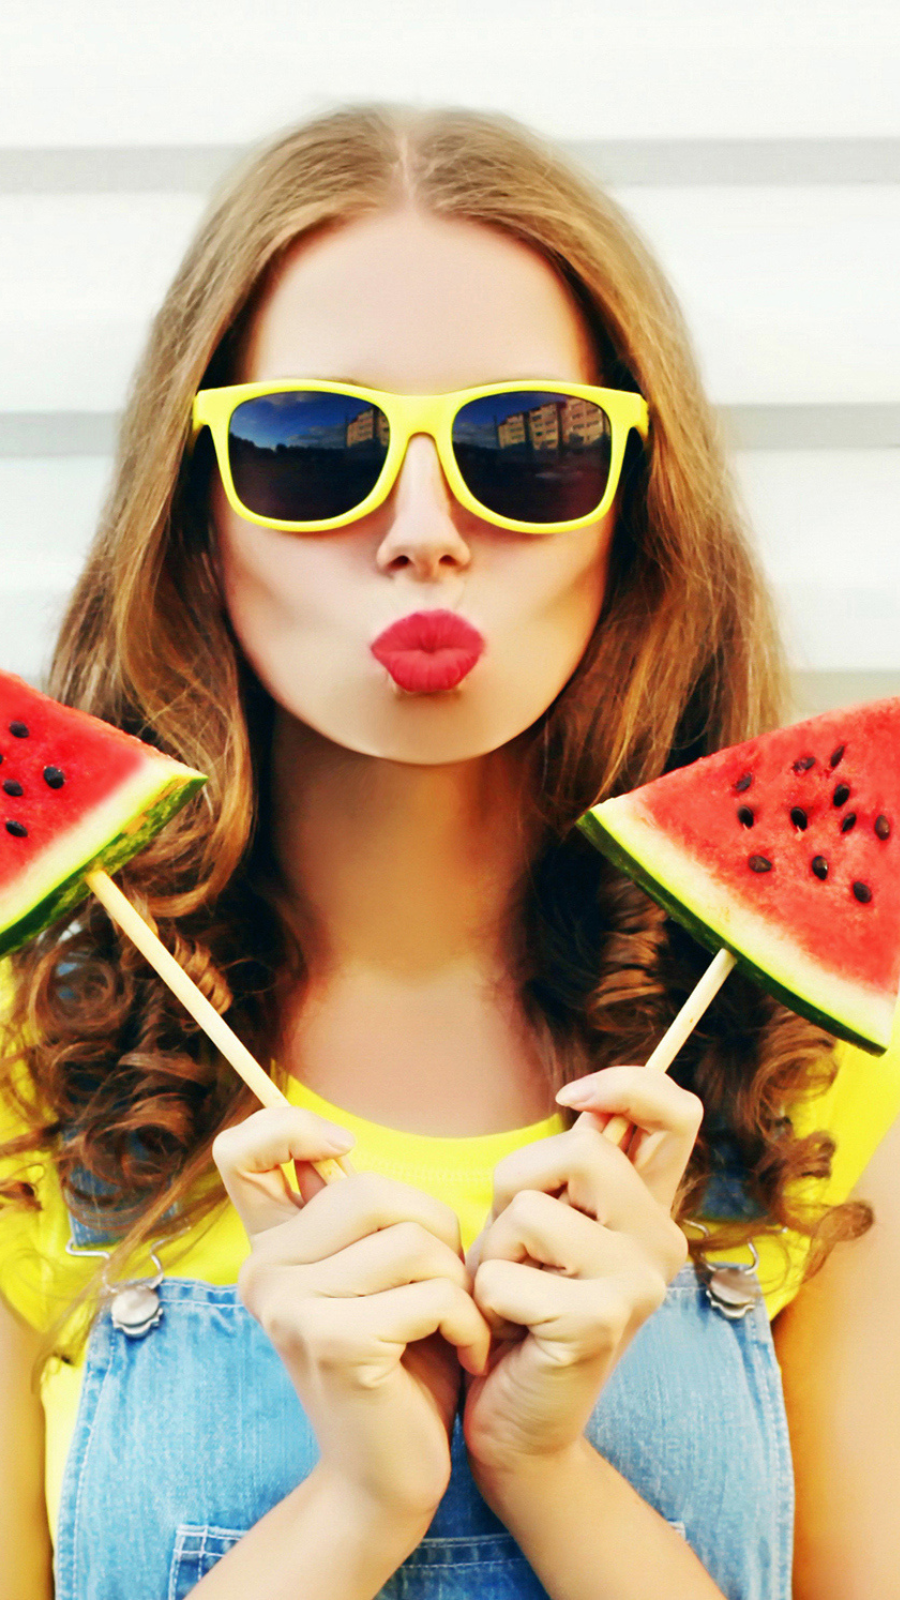 Glowing skin, weight loss: Surprising benefits of watermelon